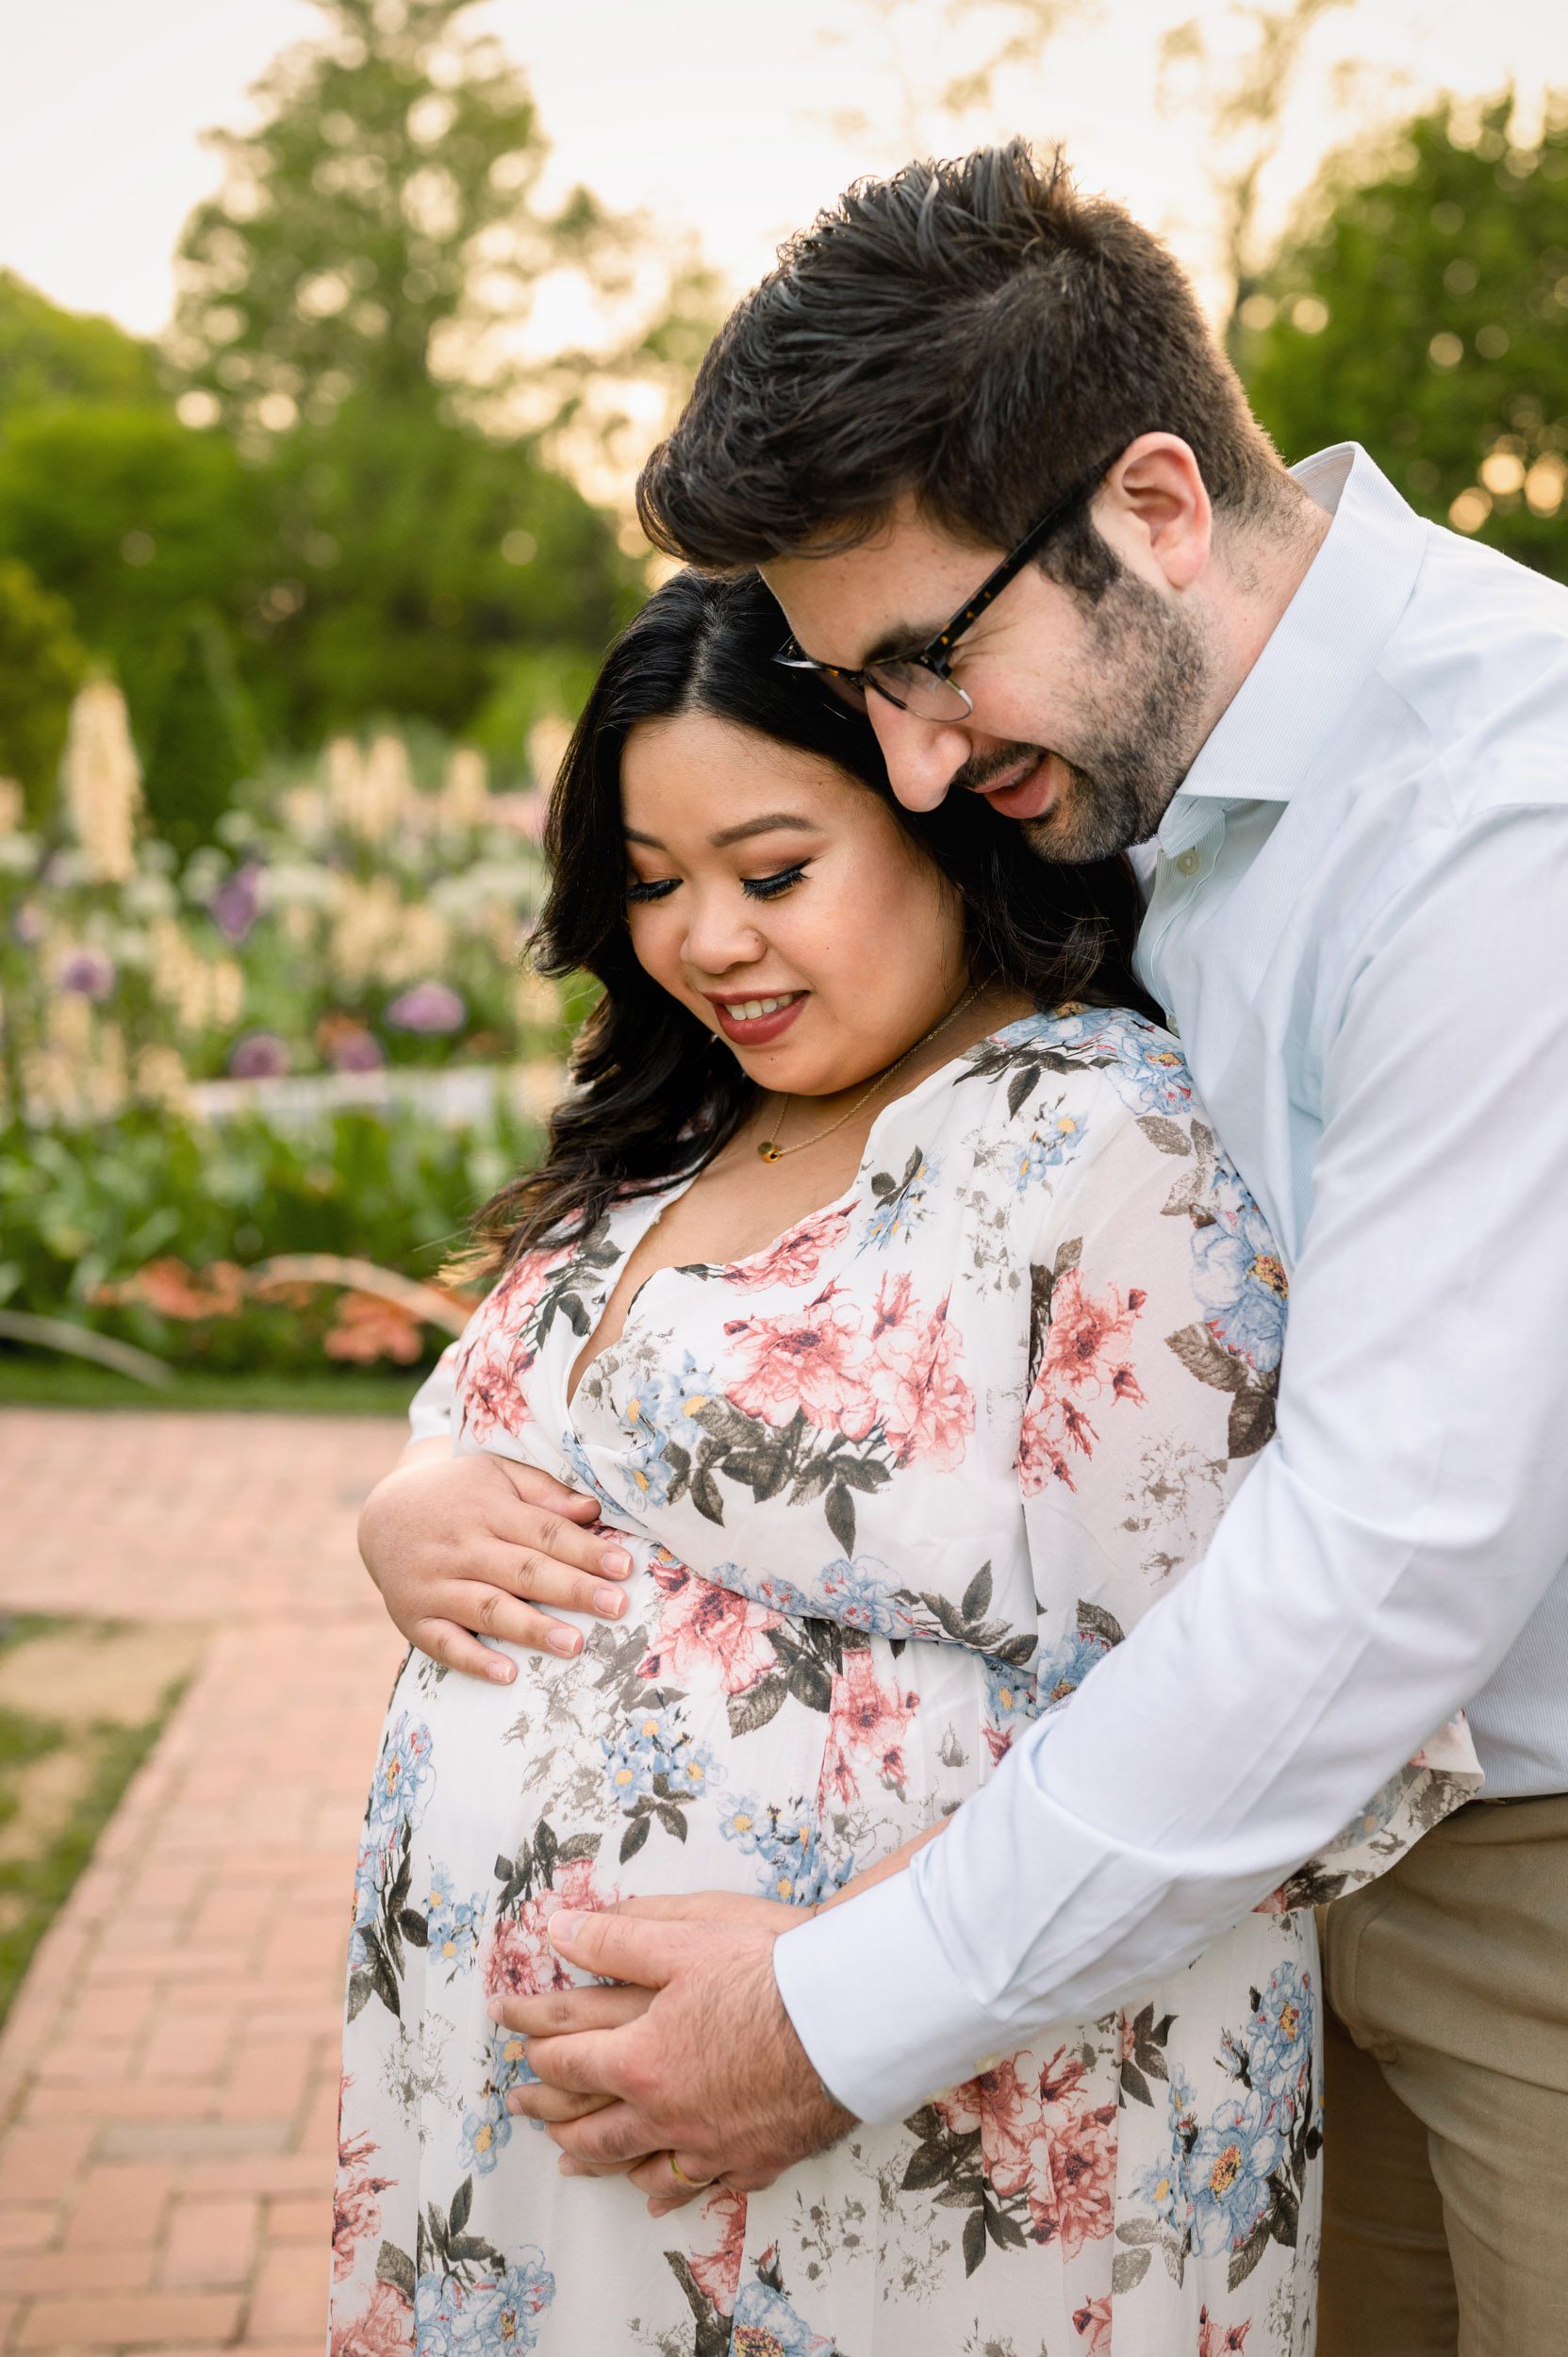 an expecting mother standing on a brick paved path with flowers blooming in the background as dad hugs and they both smile down at her belly during a Main Line maternity session